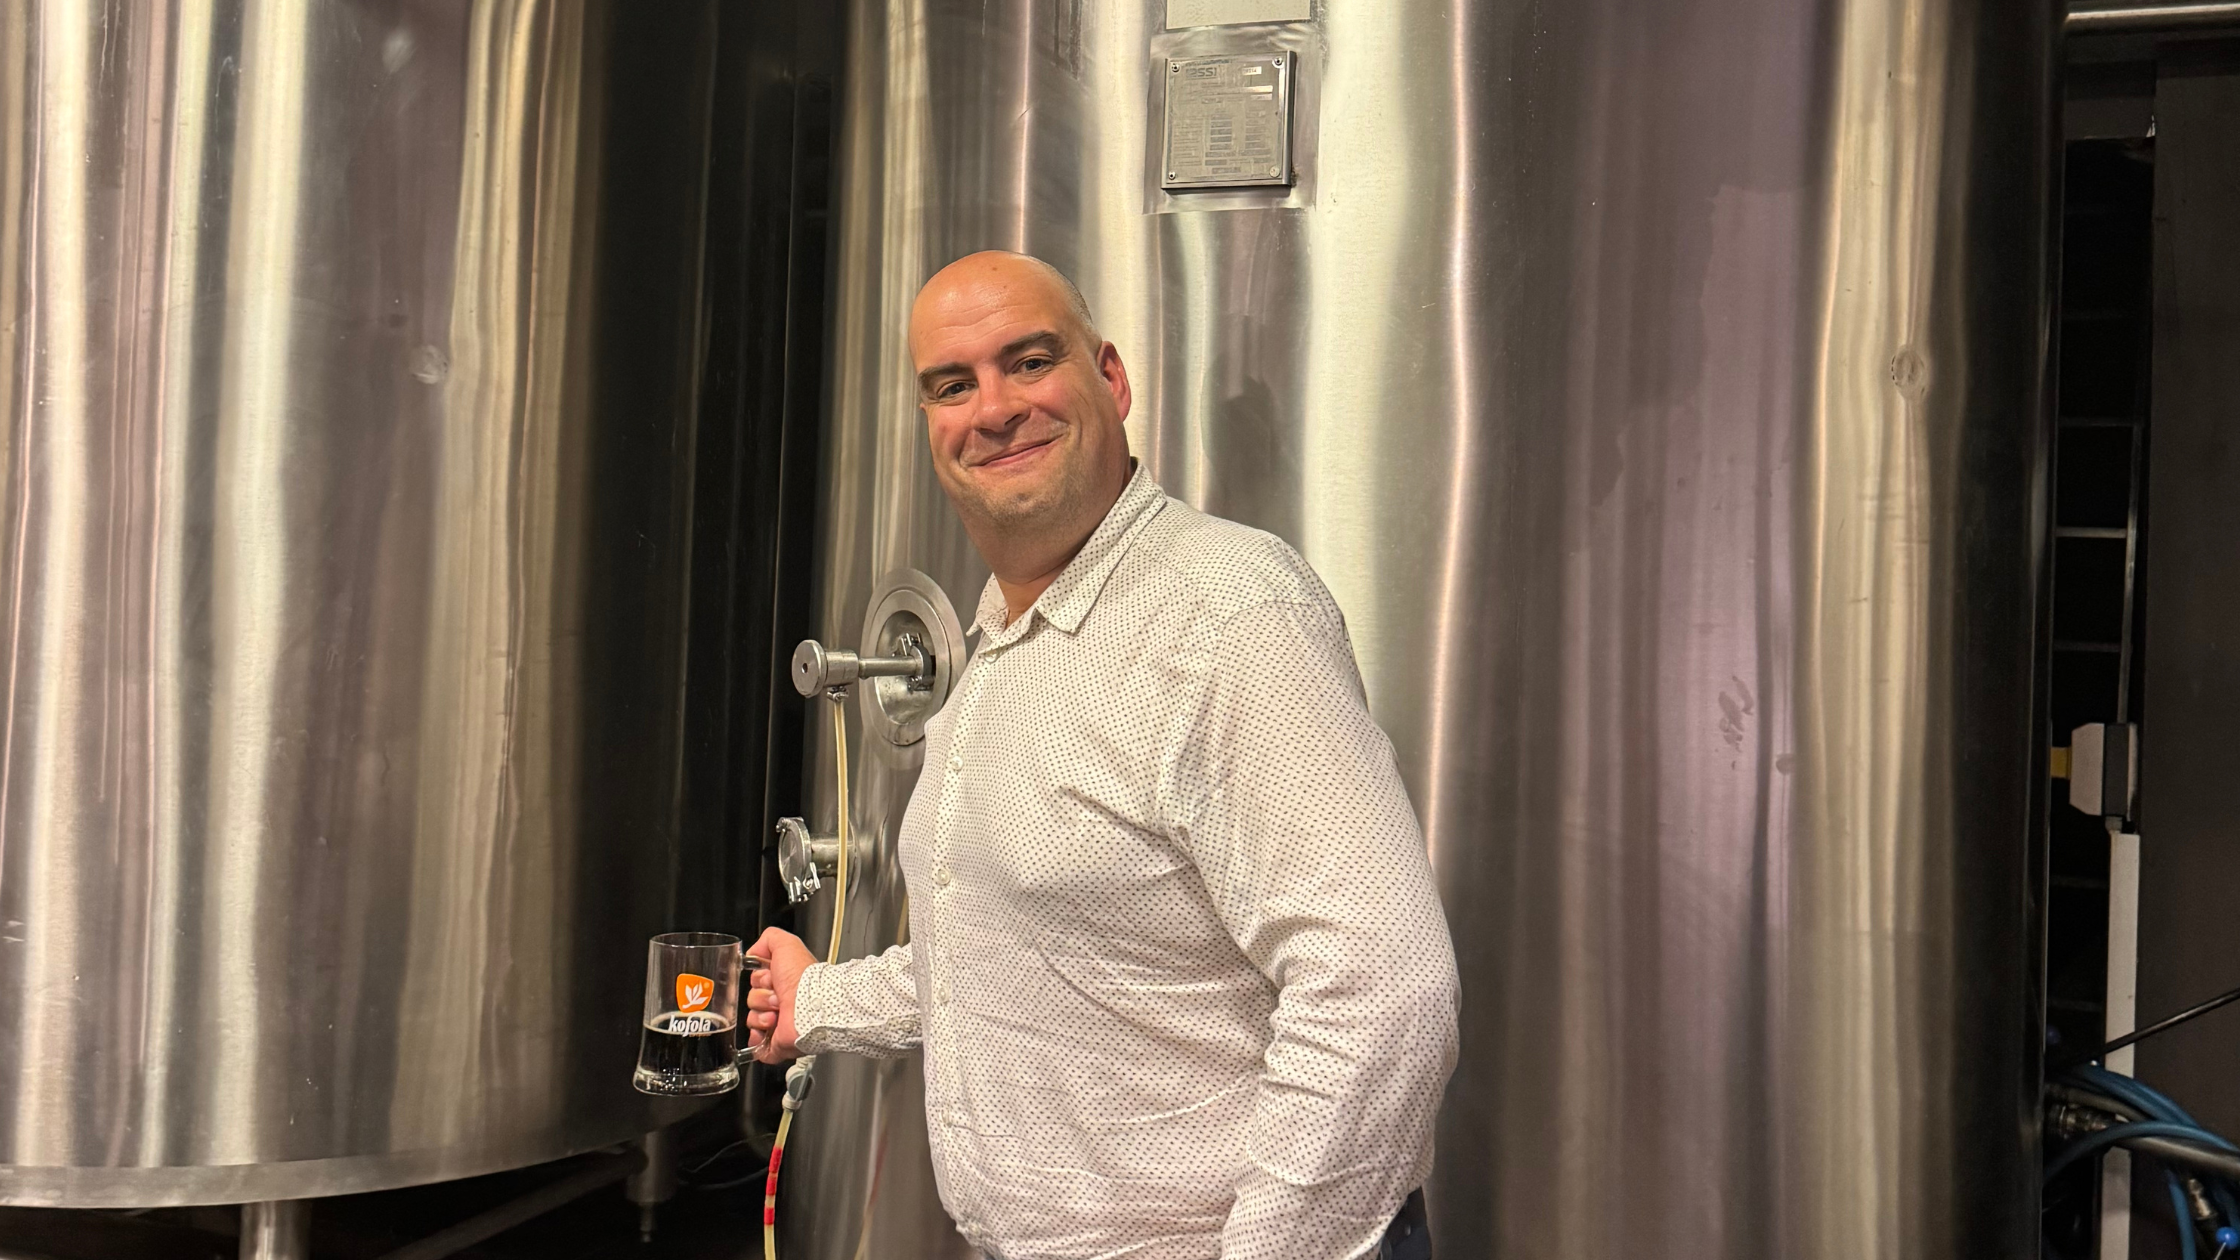 Richard Liverman stands by a tall stainless steel dispenser. He holds a beer glass.